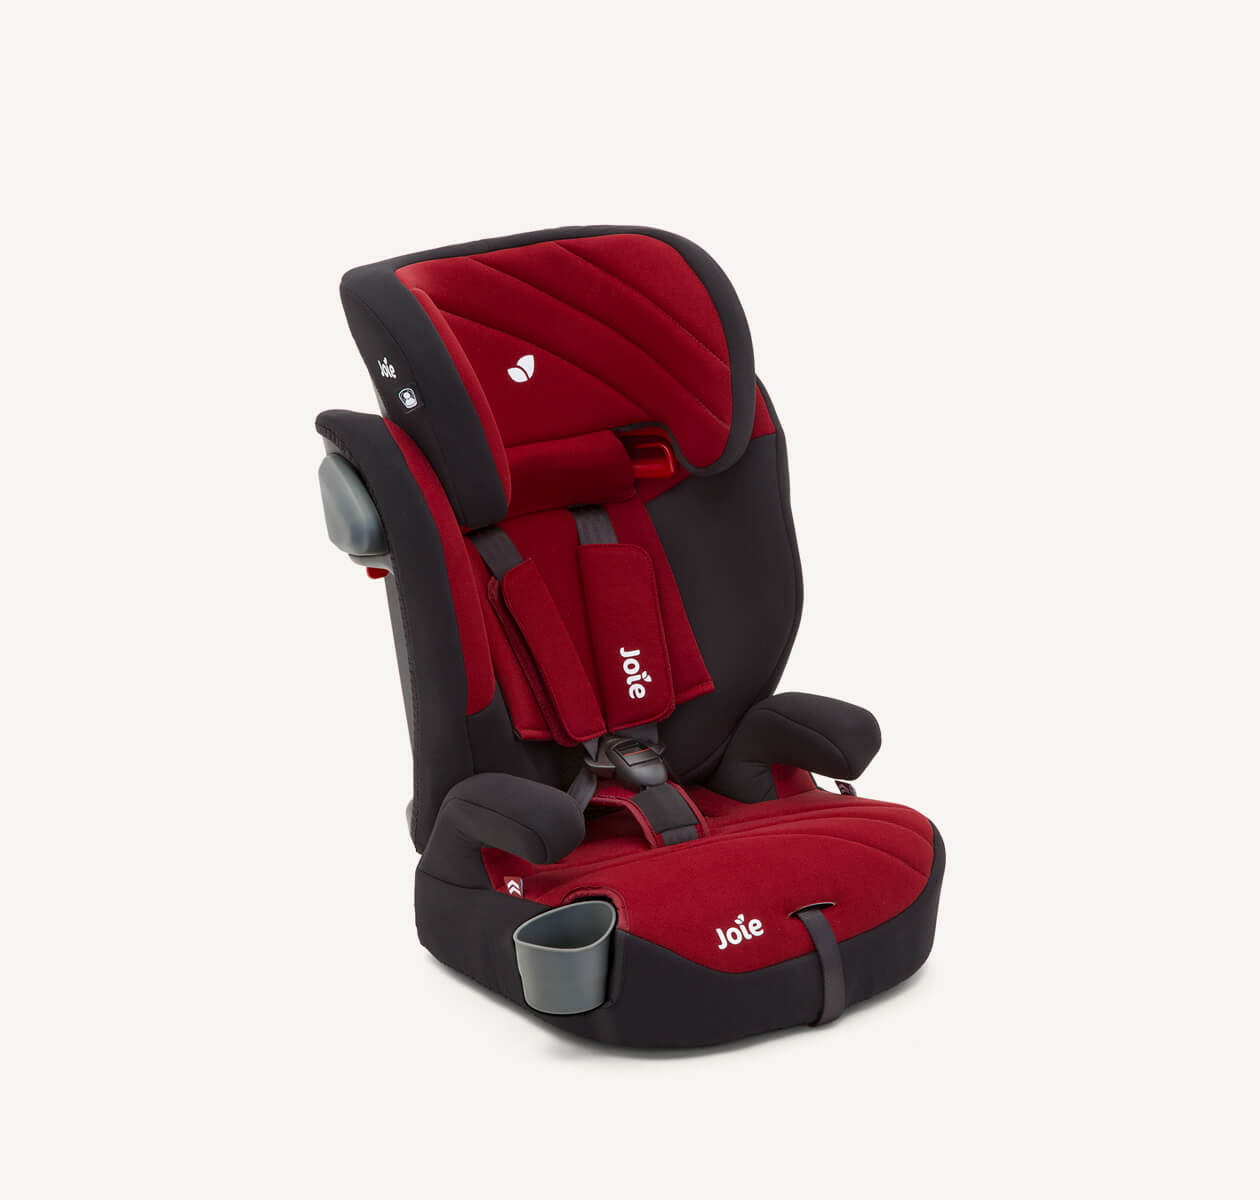  Joie Elevate booster car seat with 5-point harness in a black and red two tone colour, at an angle facing to the right.